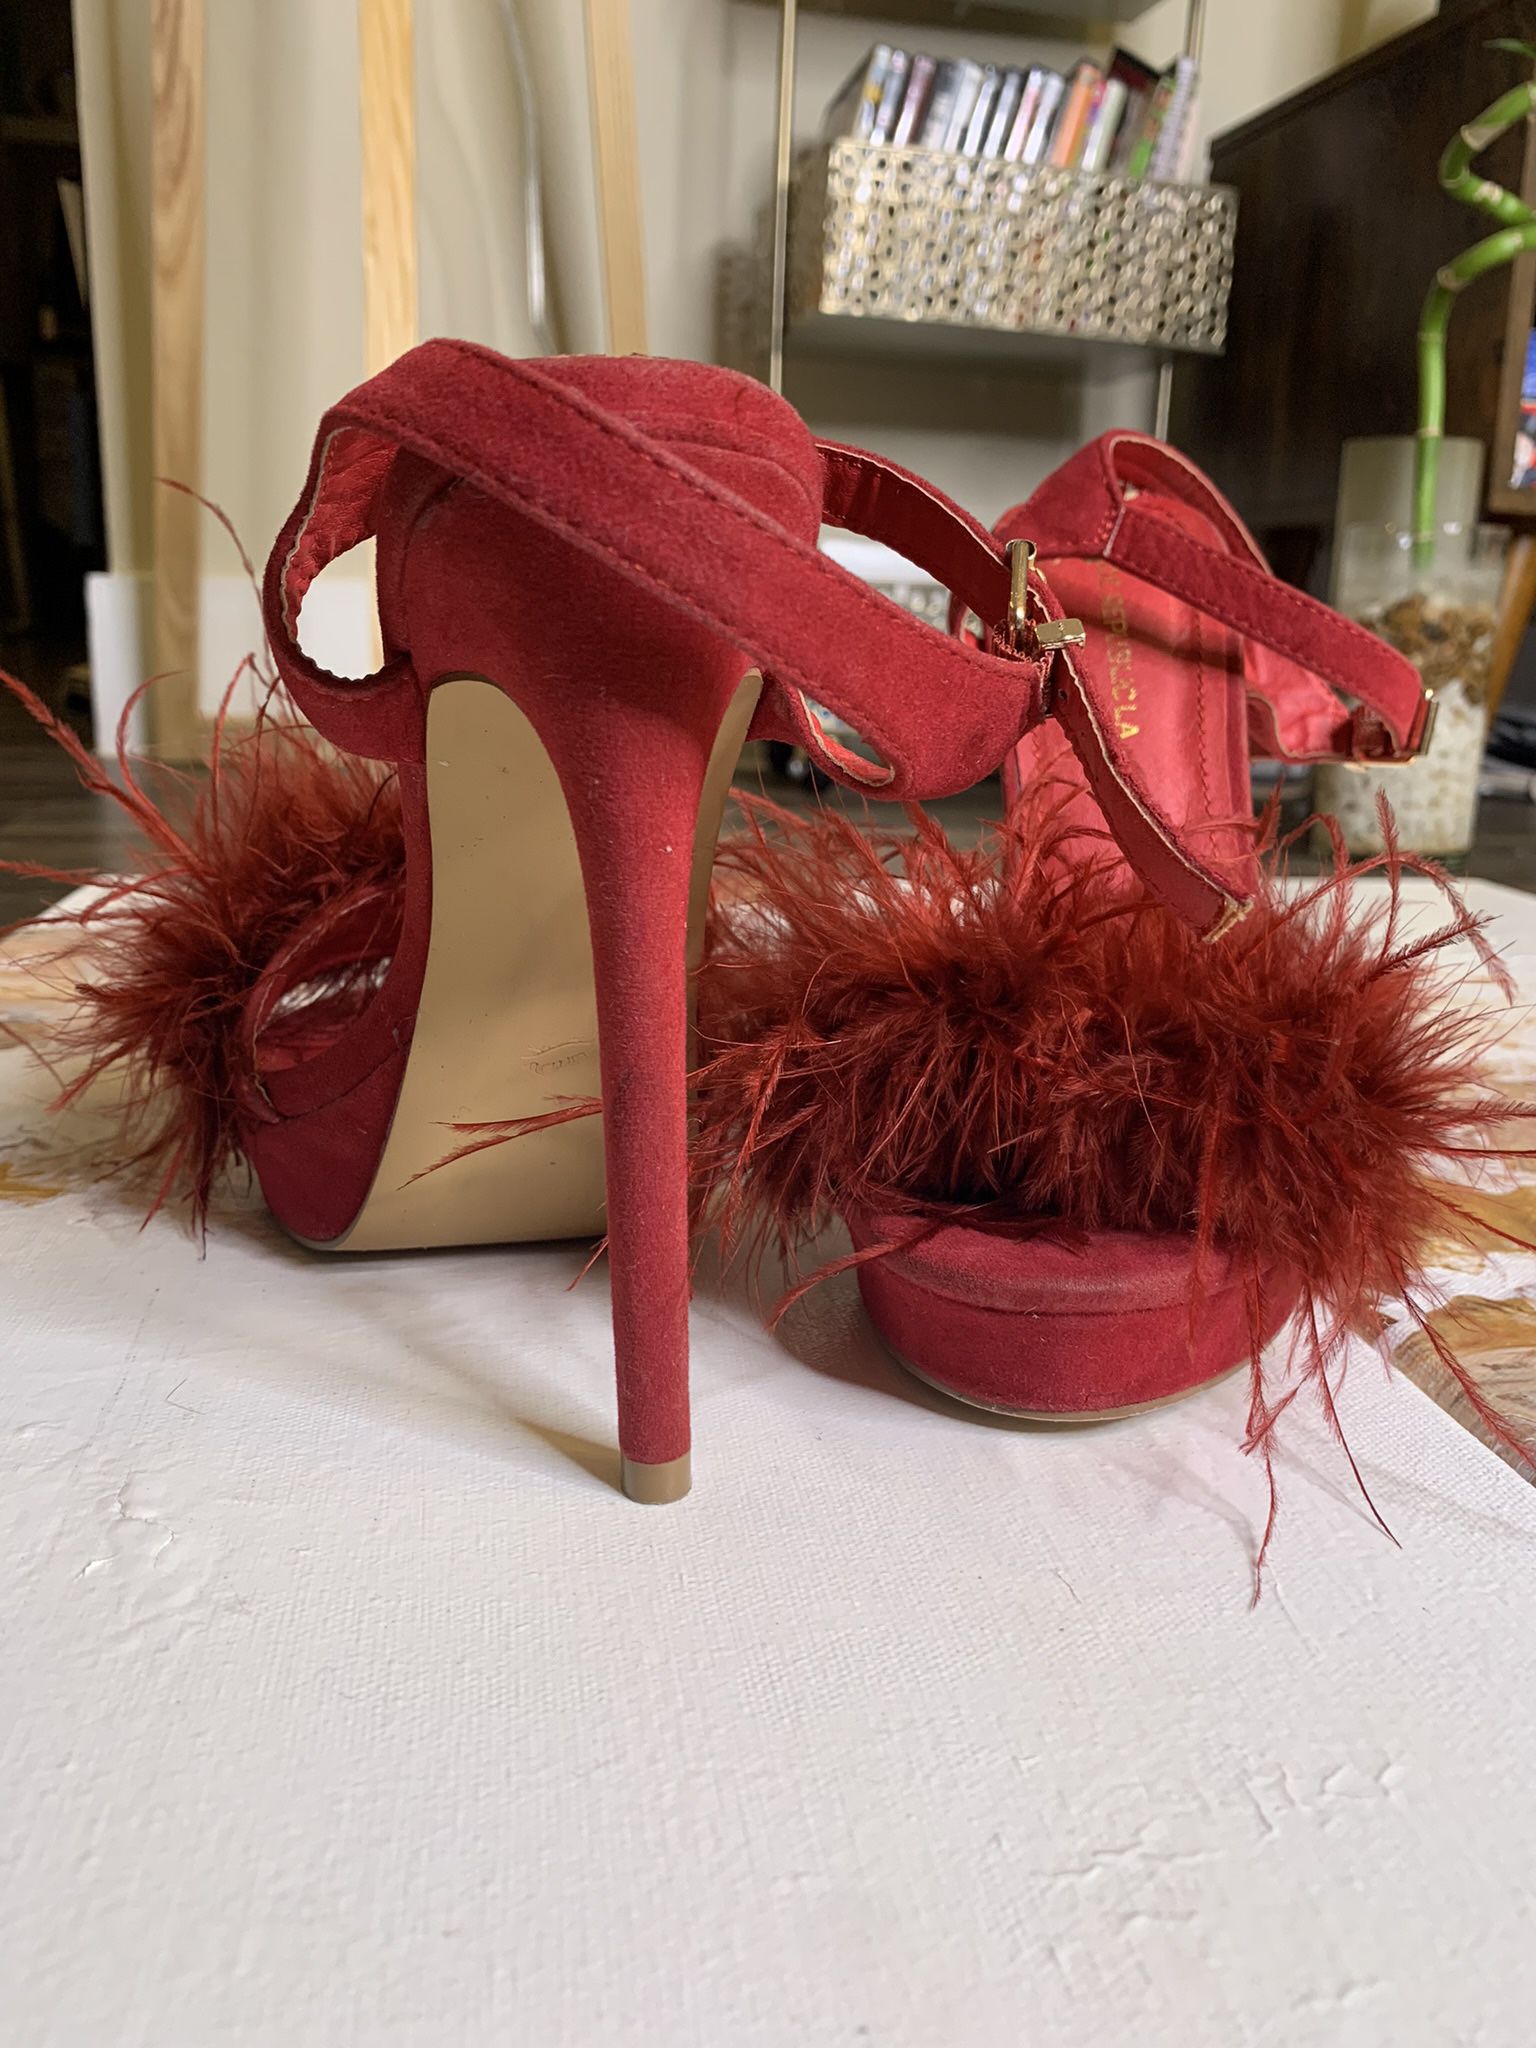 Fury Red Shoe Republica Feathered Wine Heels — Size 7 ! VALENTINES HOLIDAYS ❤️